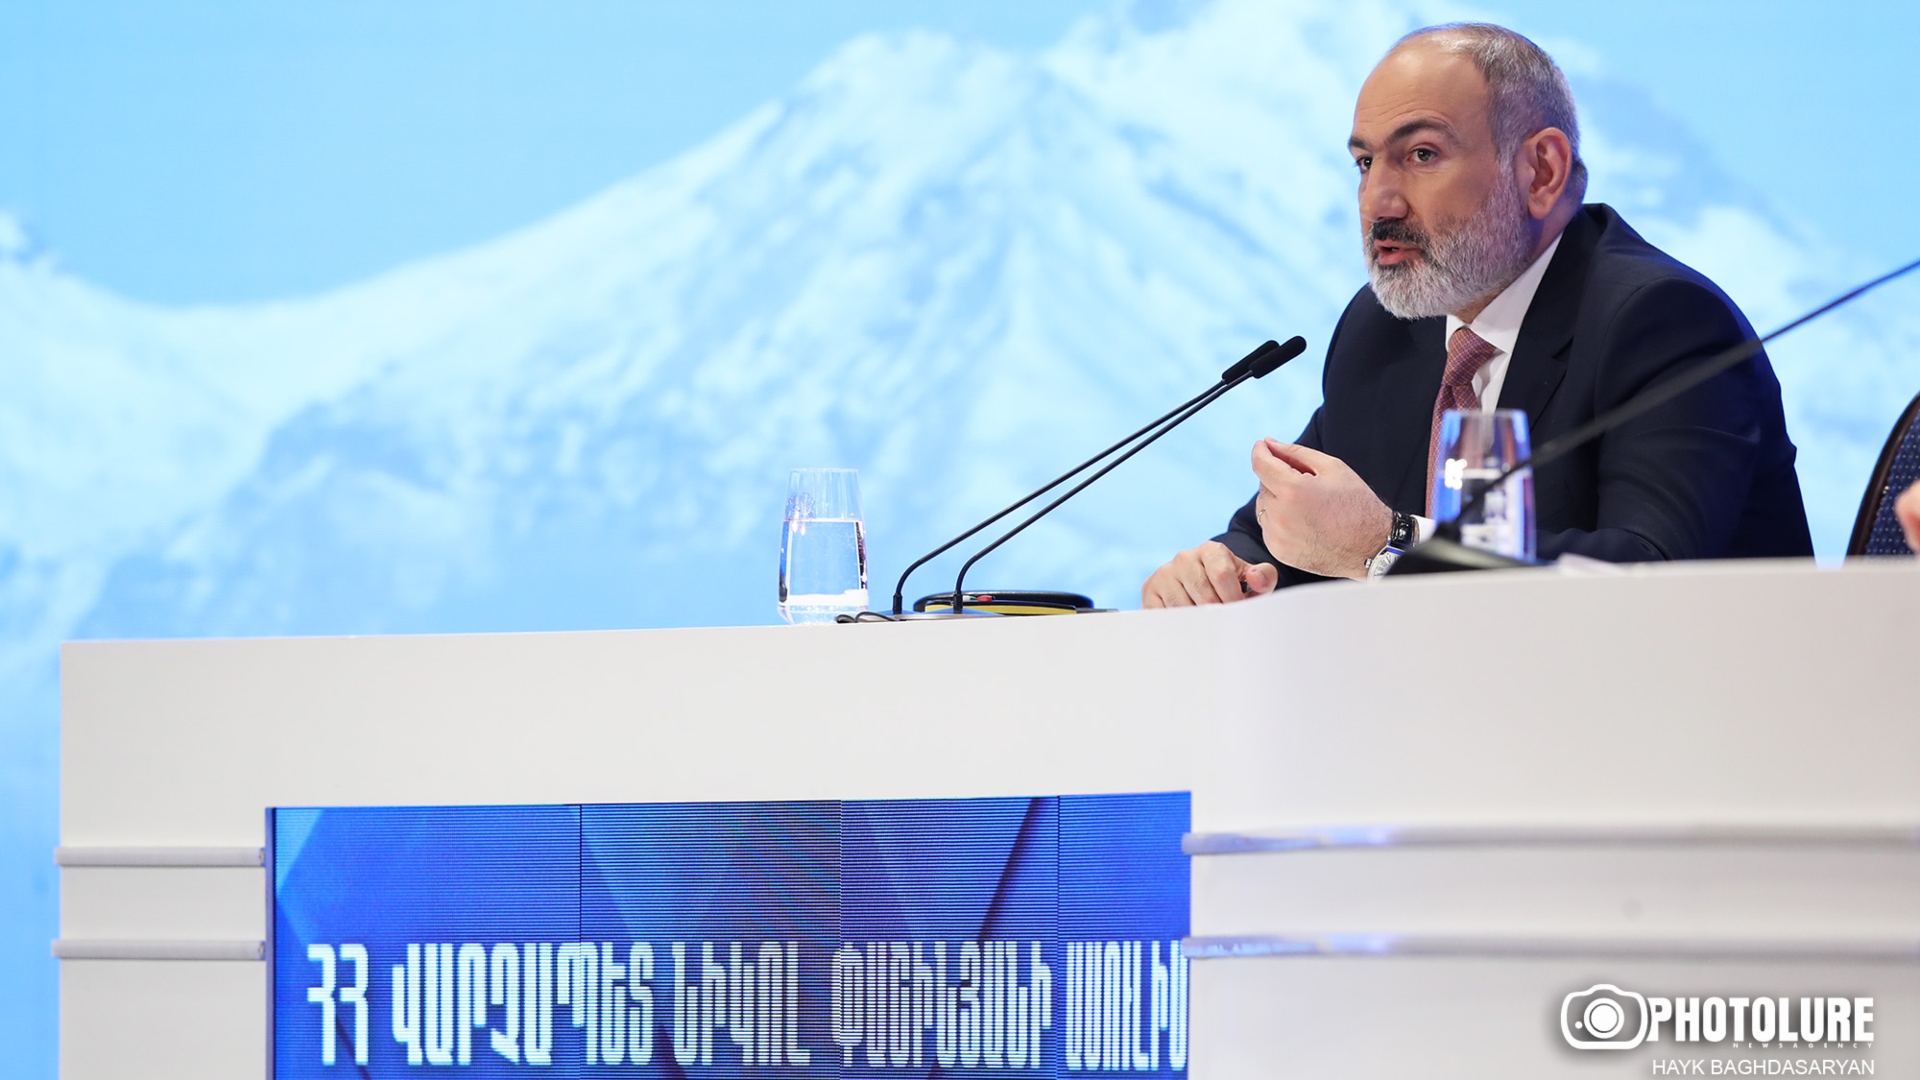 Armenia hopes to normalize relations with Baku by November, says Pashinyan